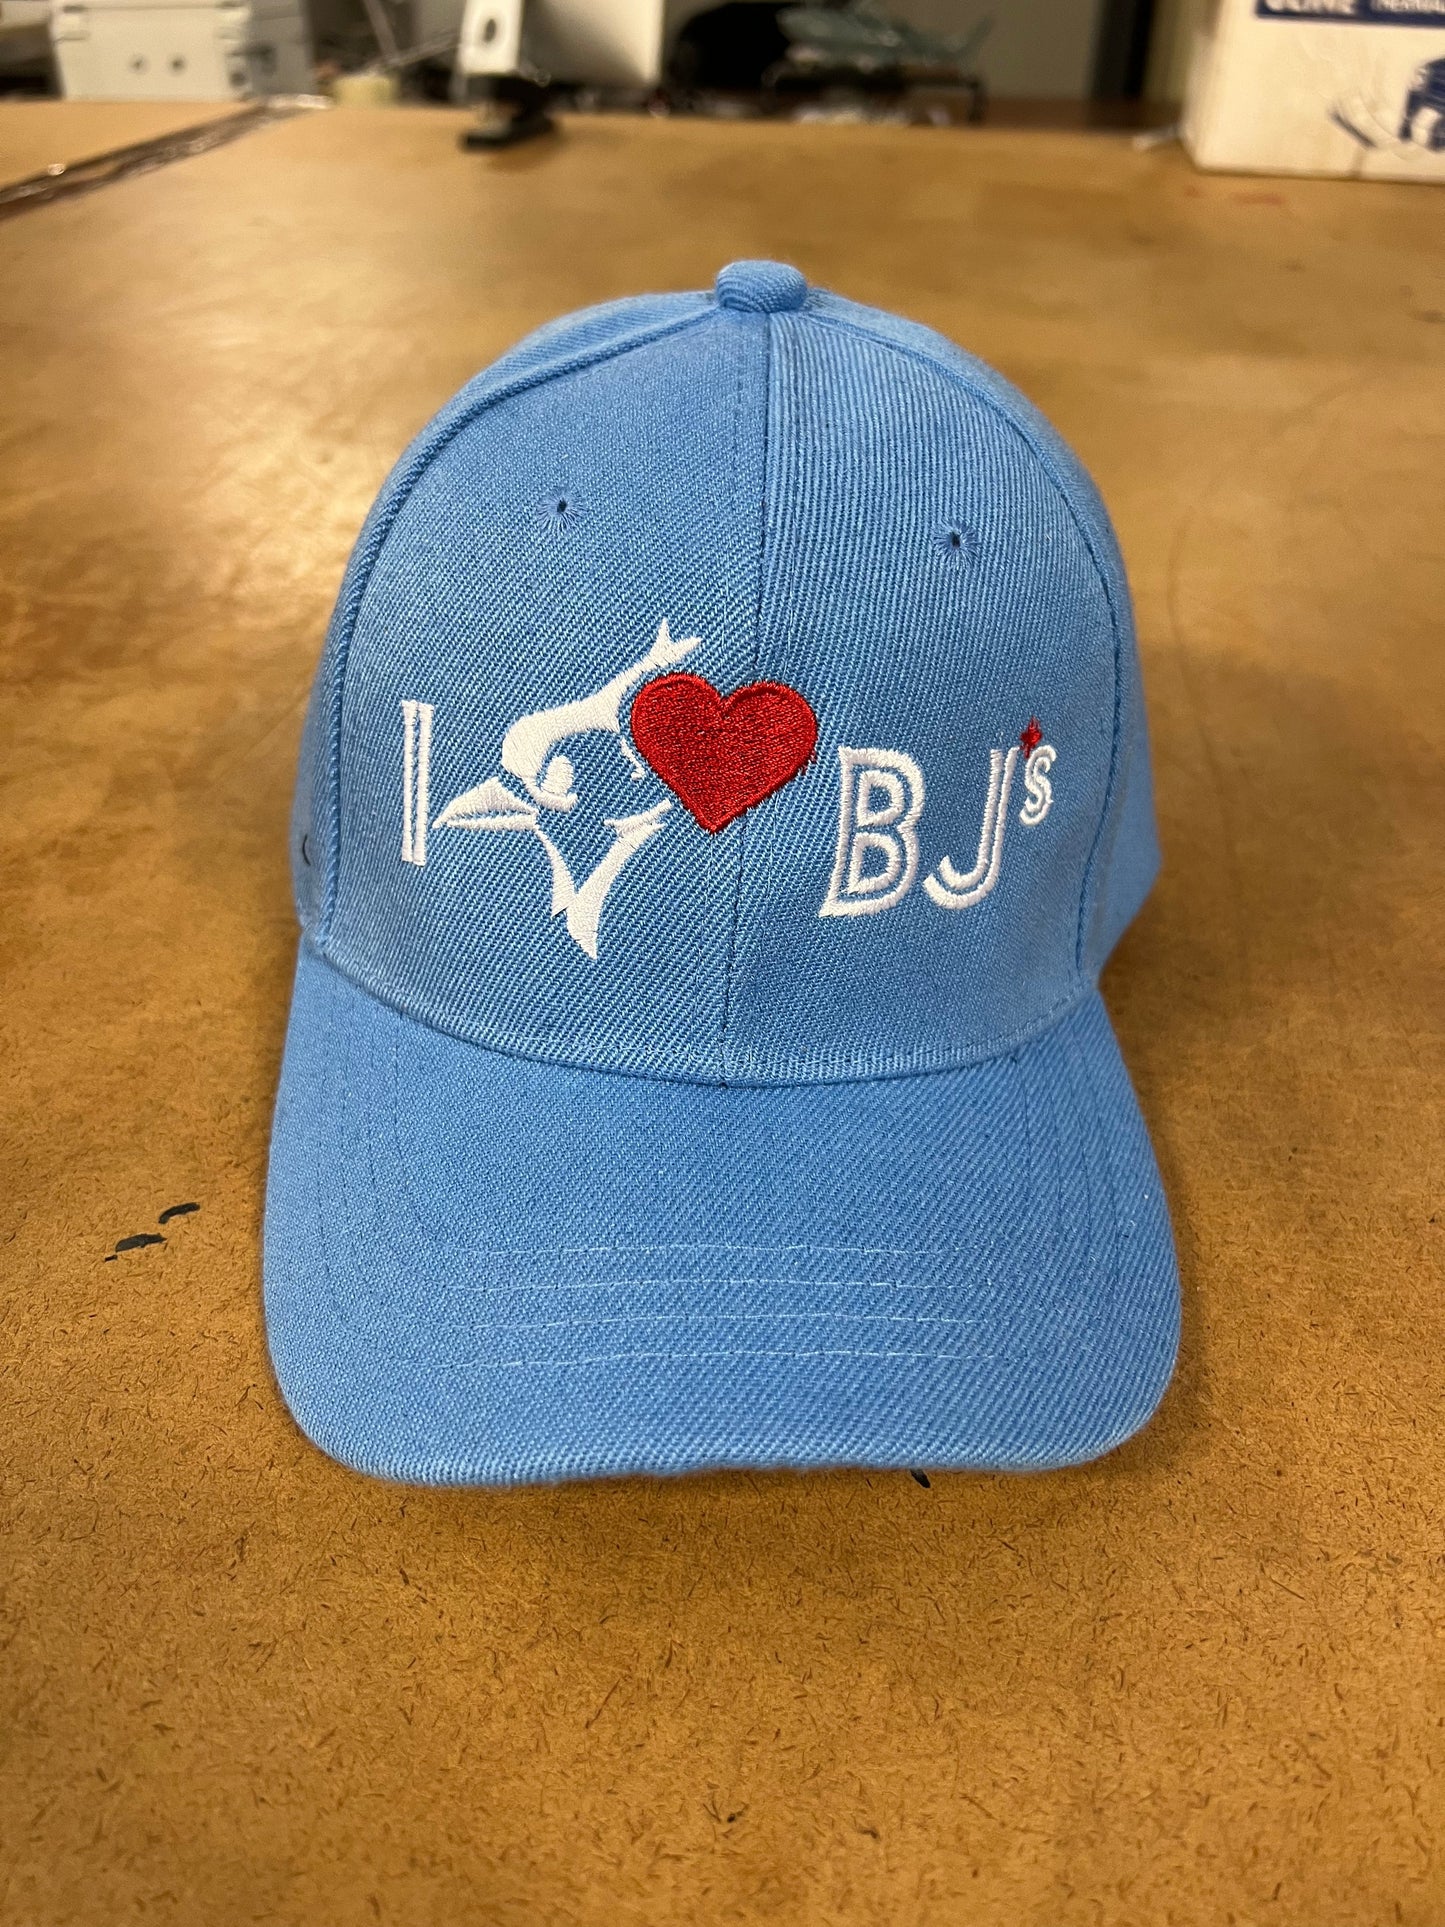 I Heart BJs One Size Fits All Hat with Velcro Strap - Light